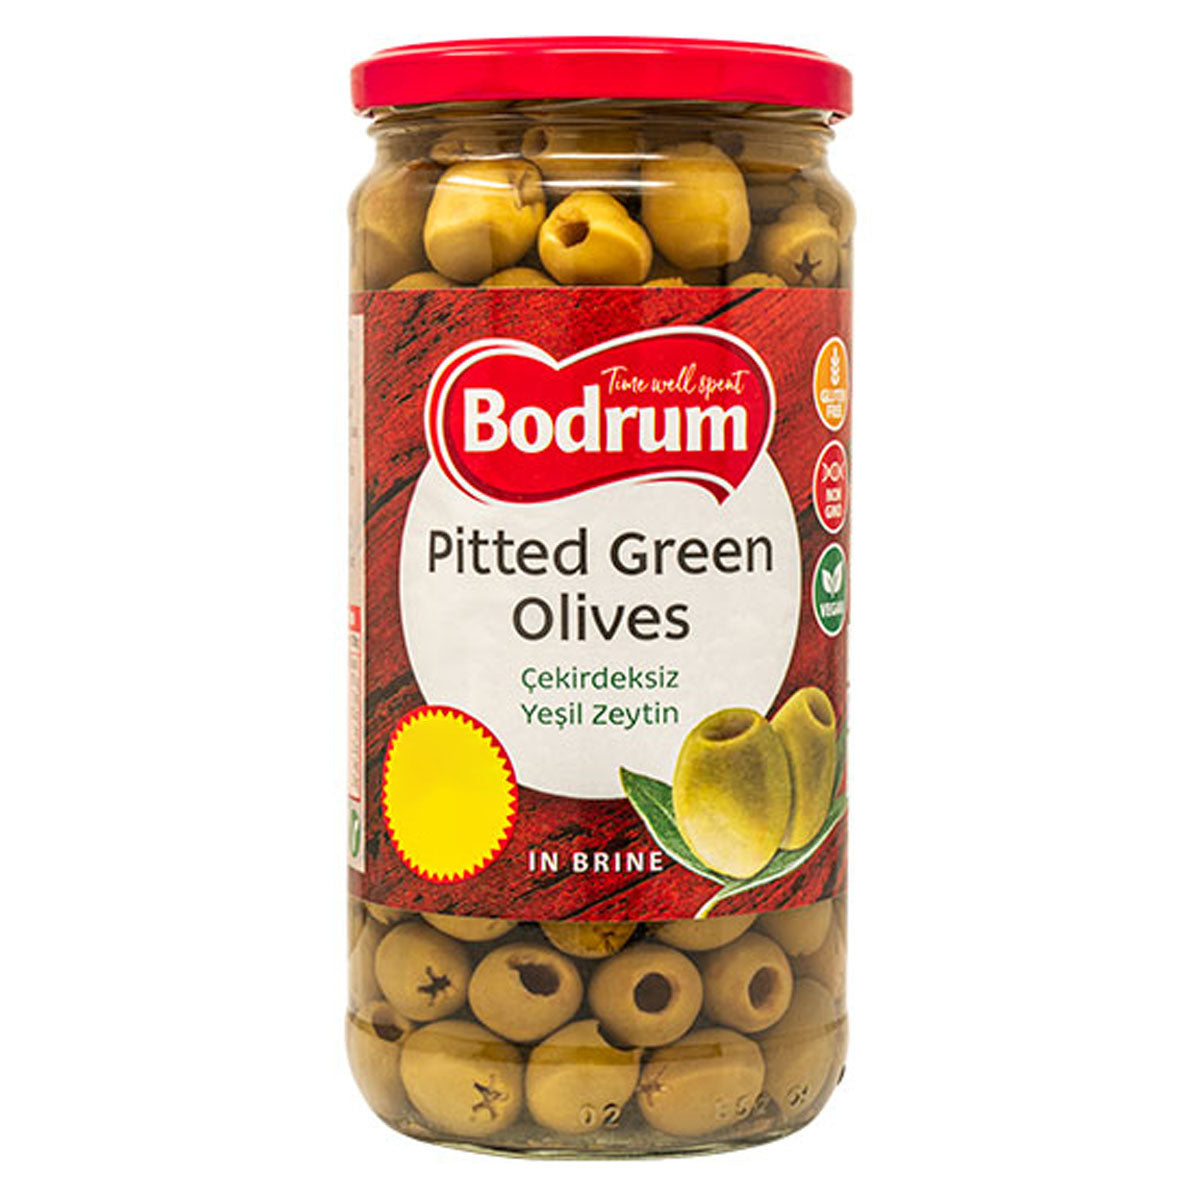 Bodrum - Pitted Green Olives - 720g - Continental Food Store